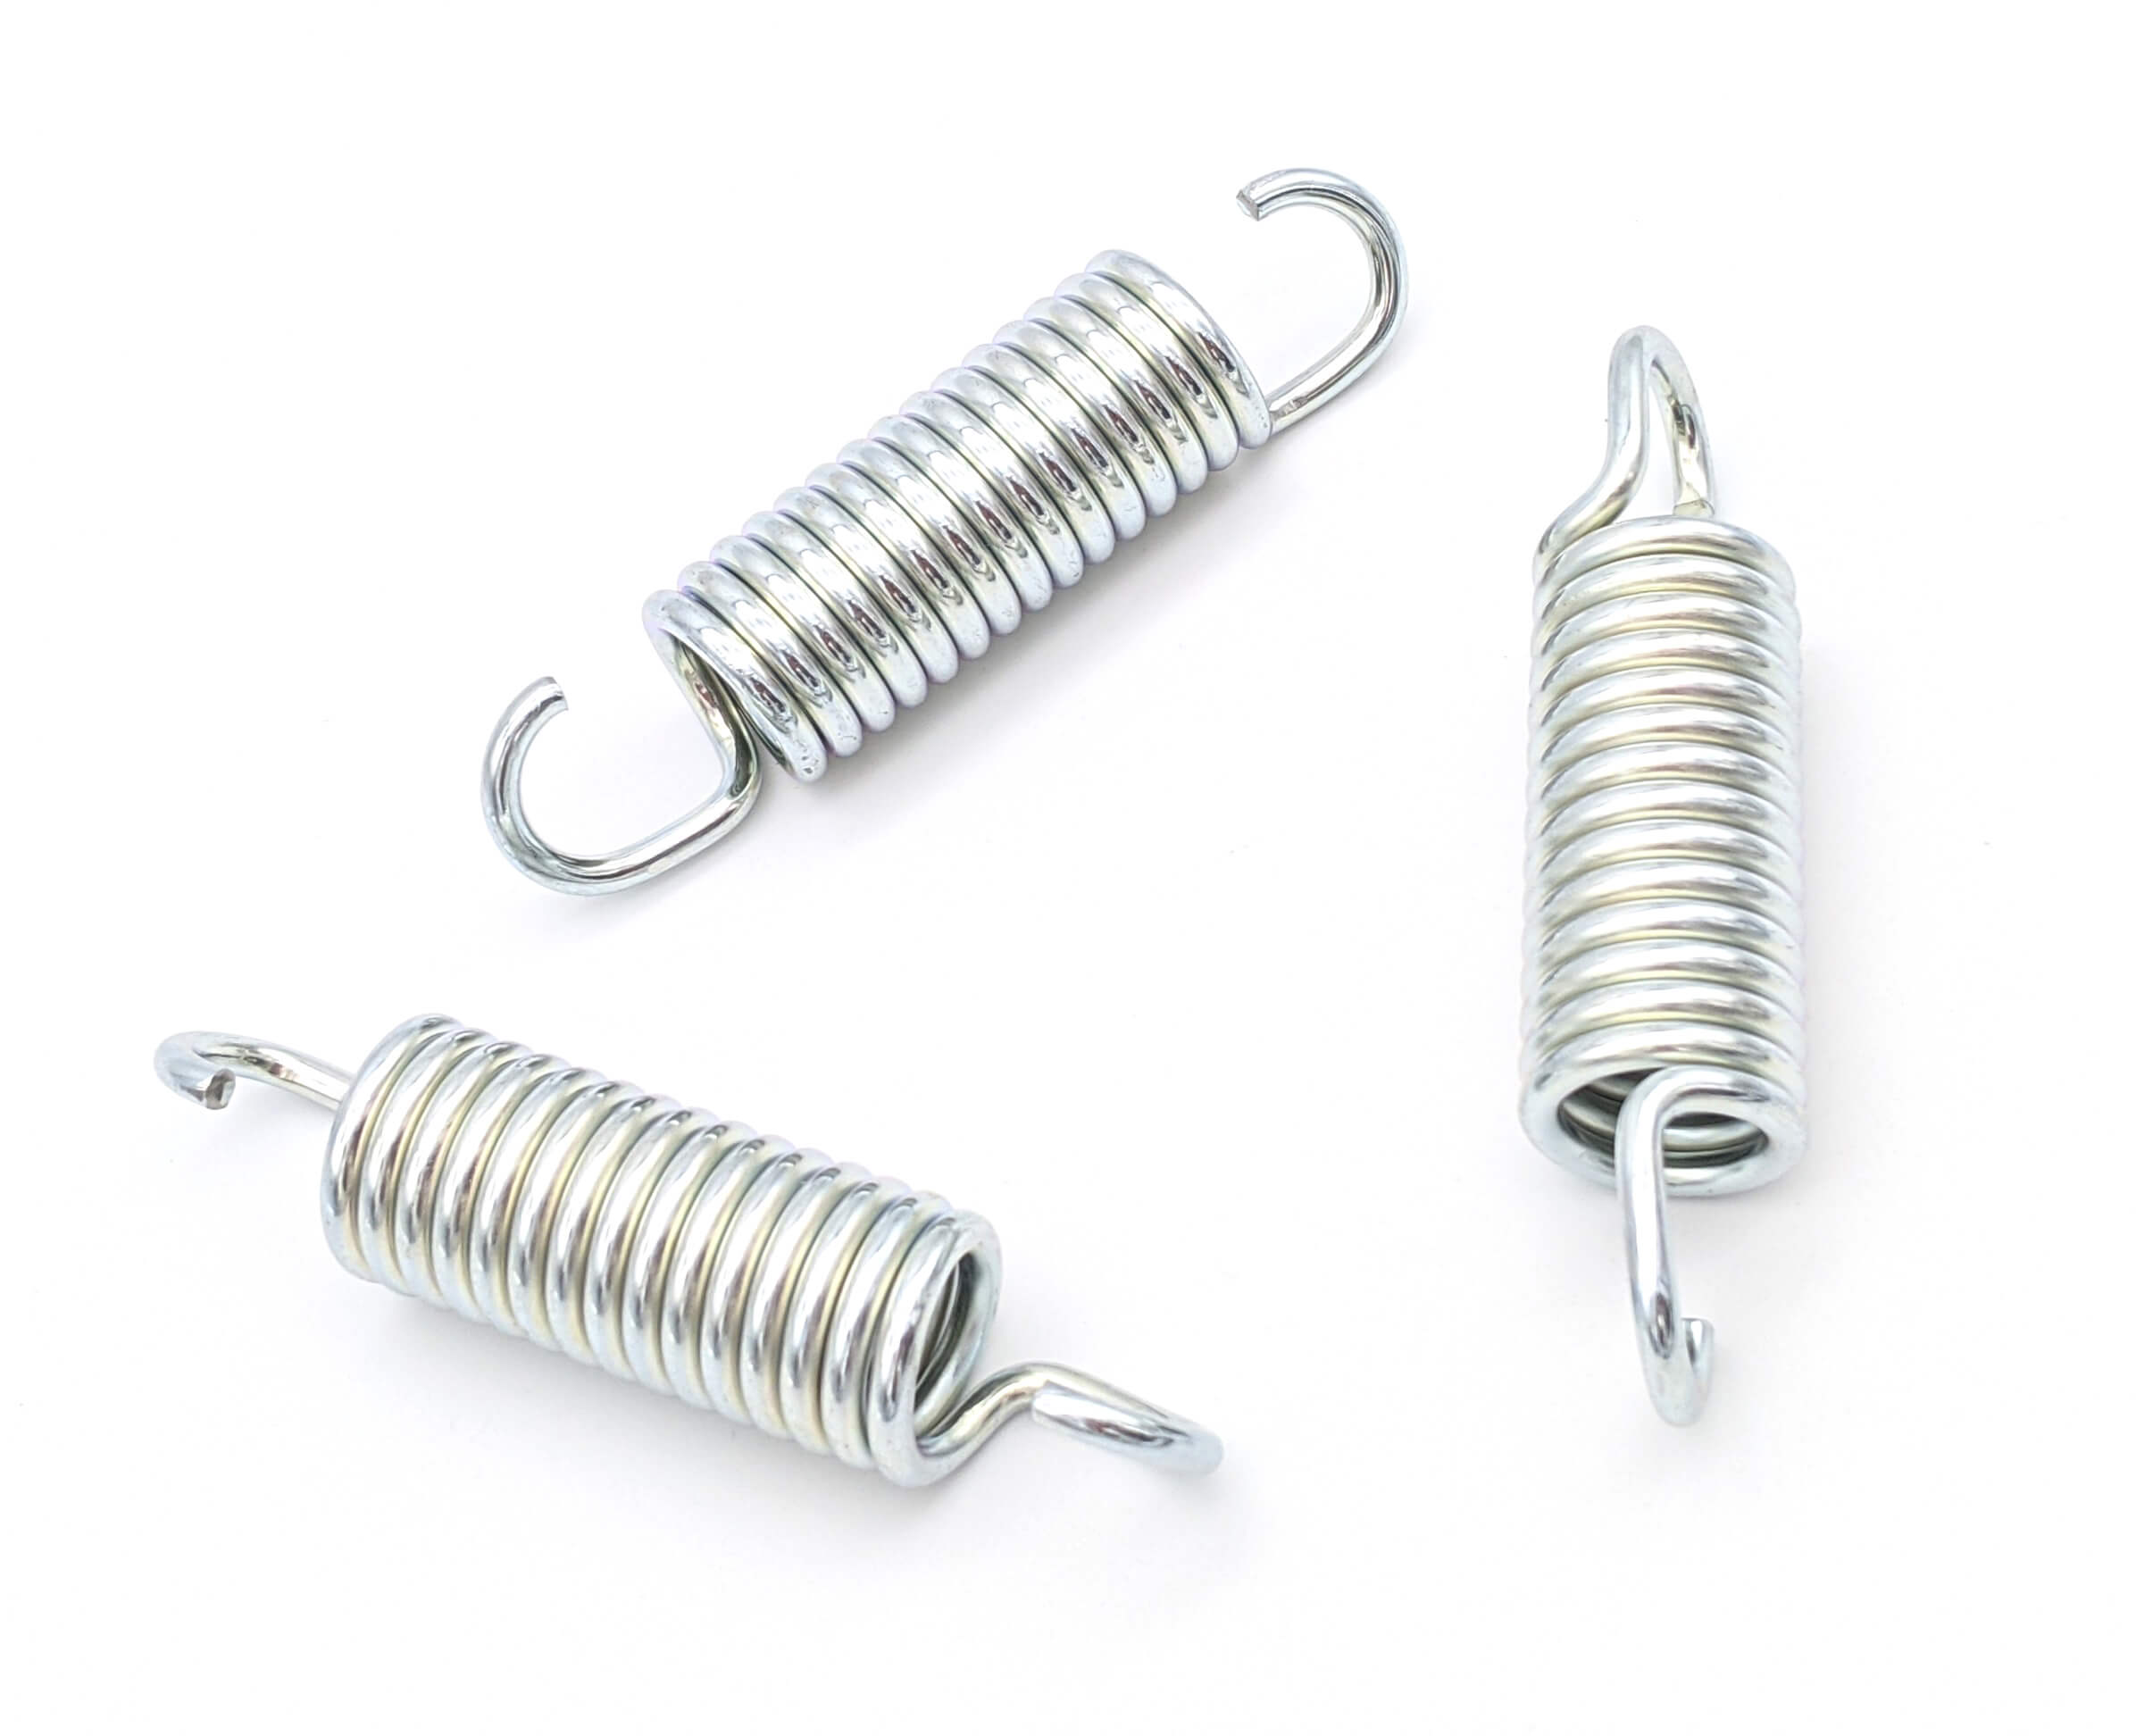 Expansion Extension Spring Expanding Extending Tension Metal working 